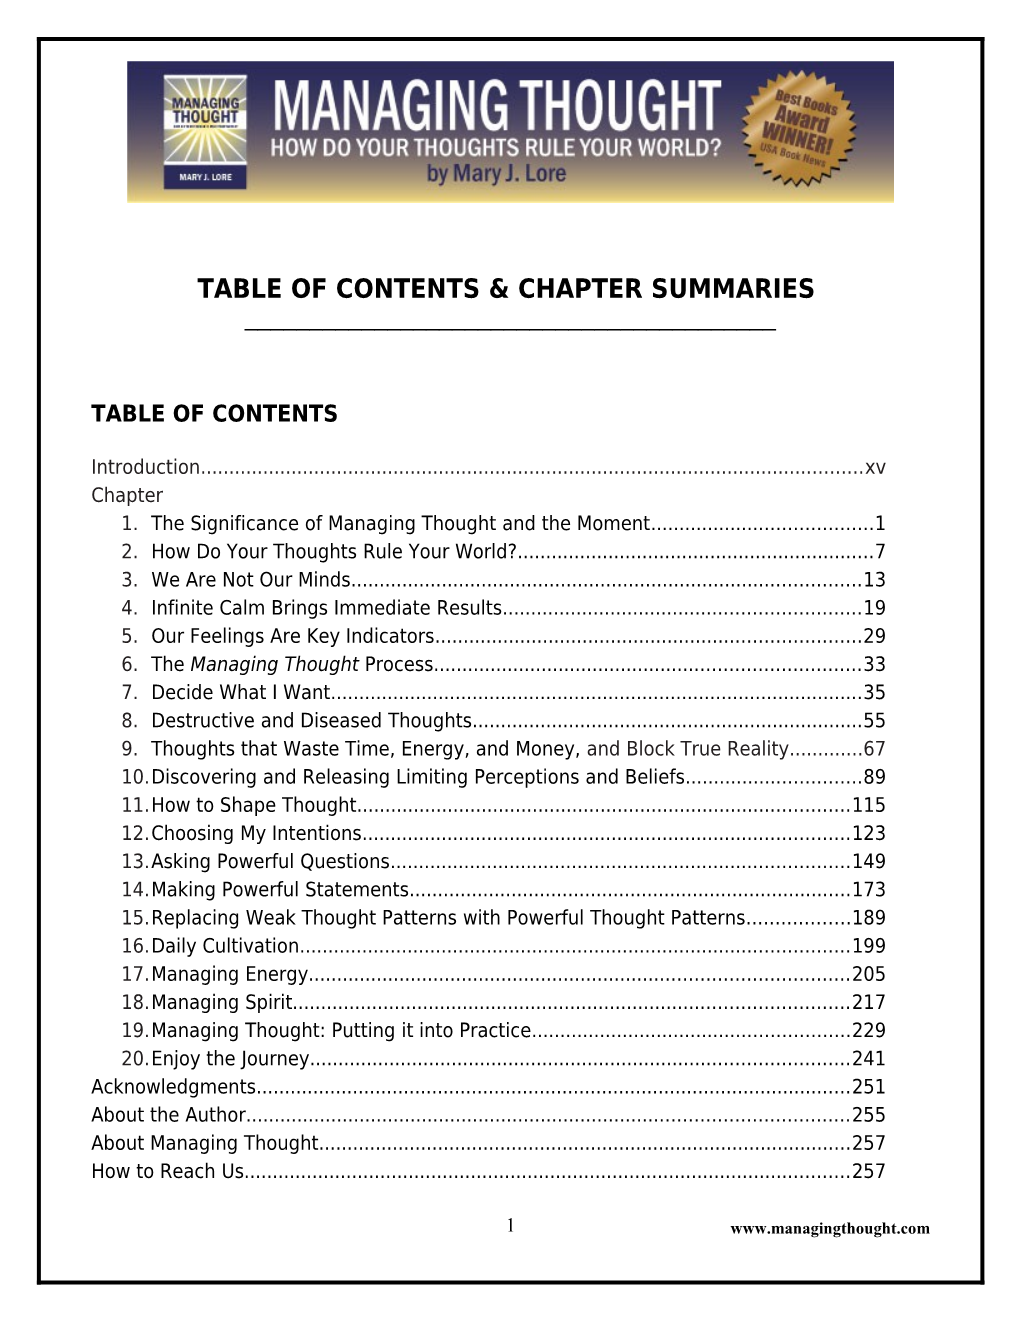 Table of Contents & Chapter Summaries